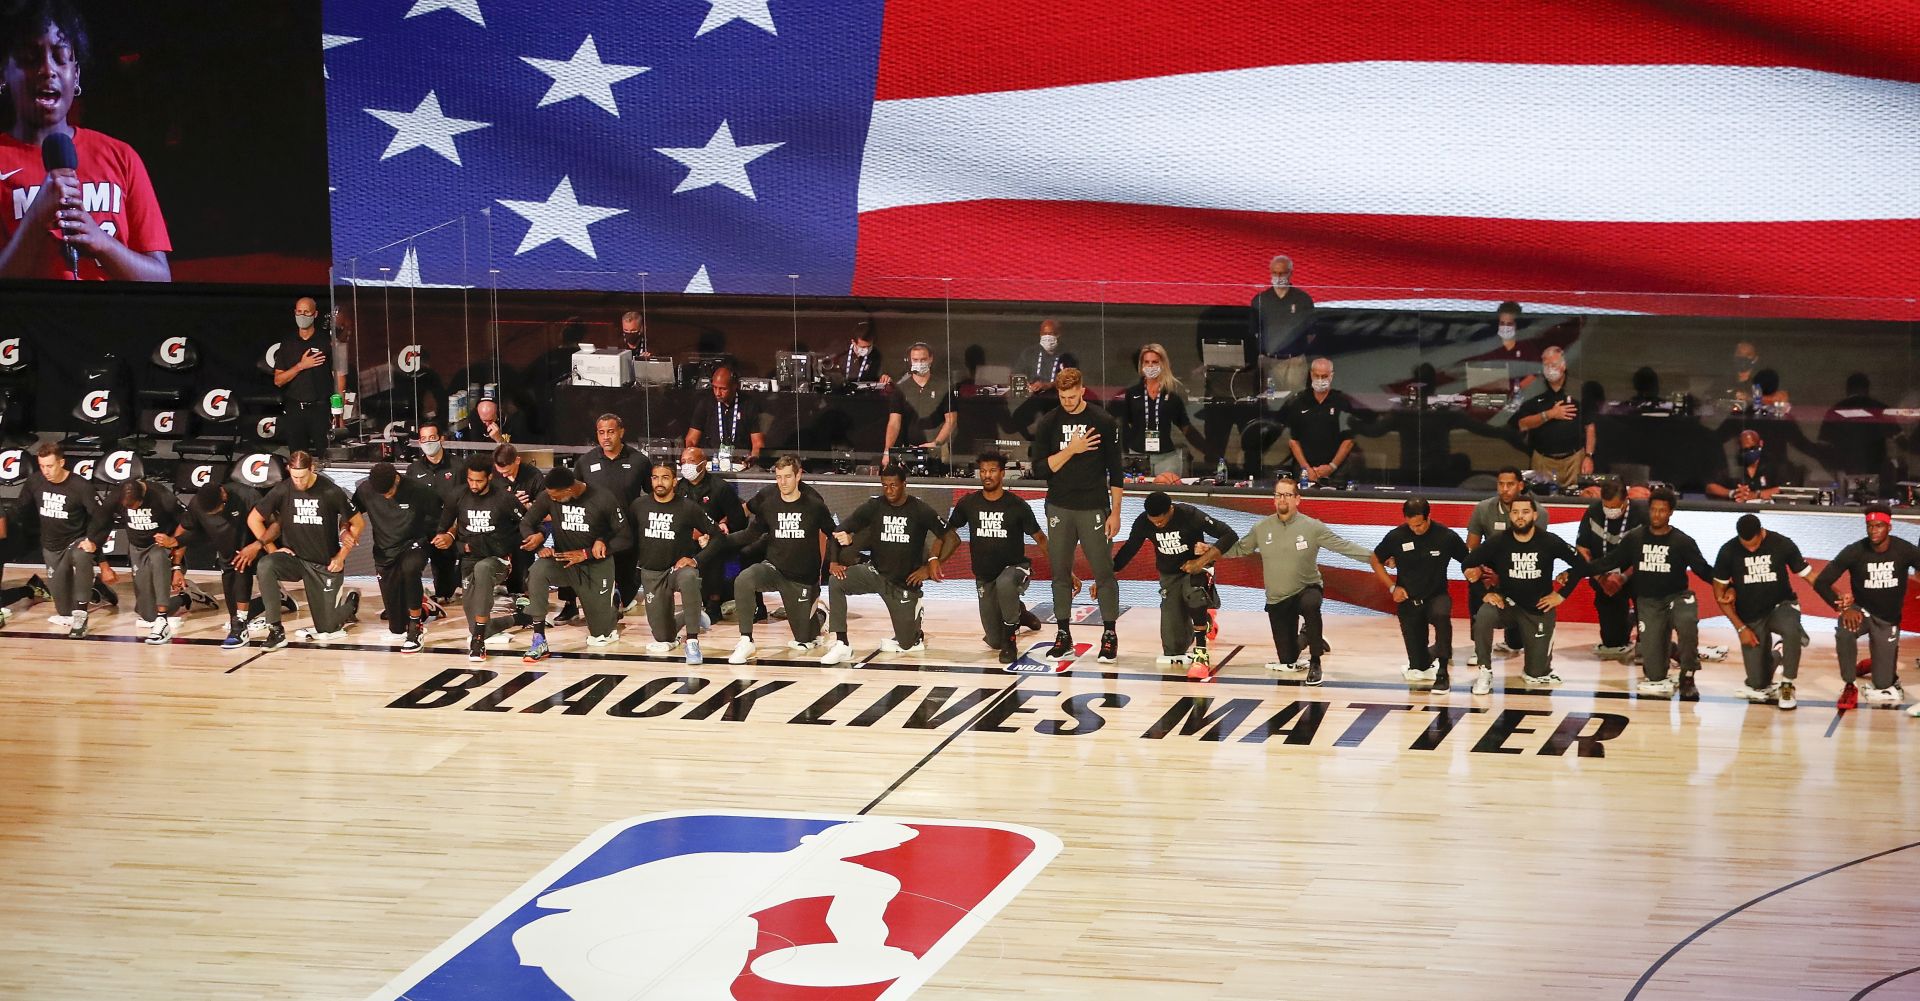 epa08582308 Members of the Toronto Raptors and the Miami Heat kneel during the National Anthem before the start of the NBA basketball game between the Toronto Raptors and the Miami Heat at the ESPN Wide World of Sports Complex in Kissimmee, Florida, USA, 03 August 2020. The NBA season has restarted at the Walt Disney World sports complex outside Orlando, Florida.  EPA/ERIK S. LESSER SHUTTERSTOCK OUT